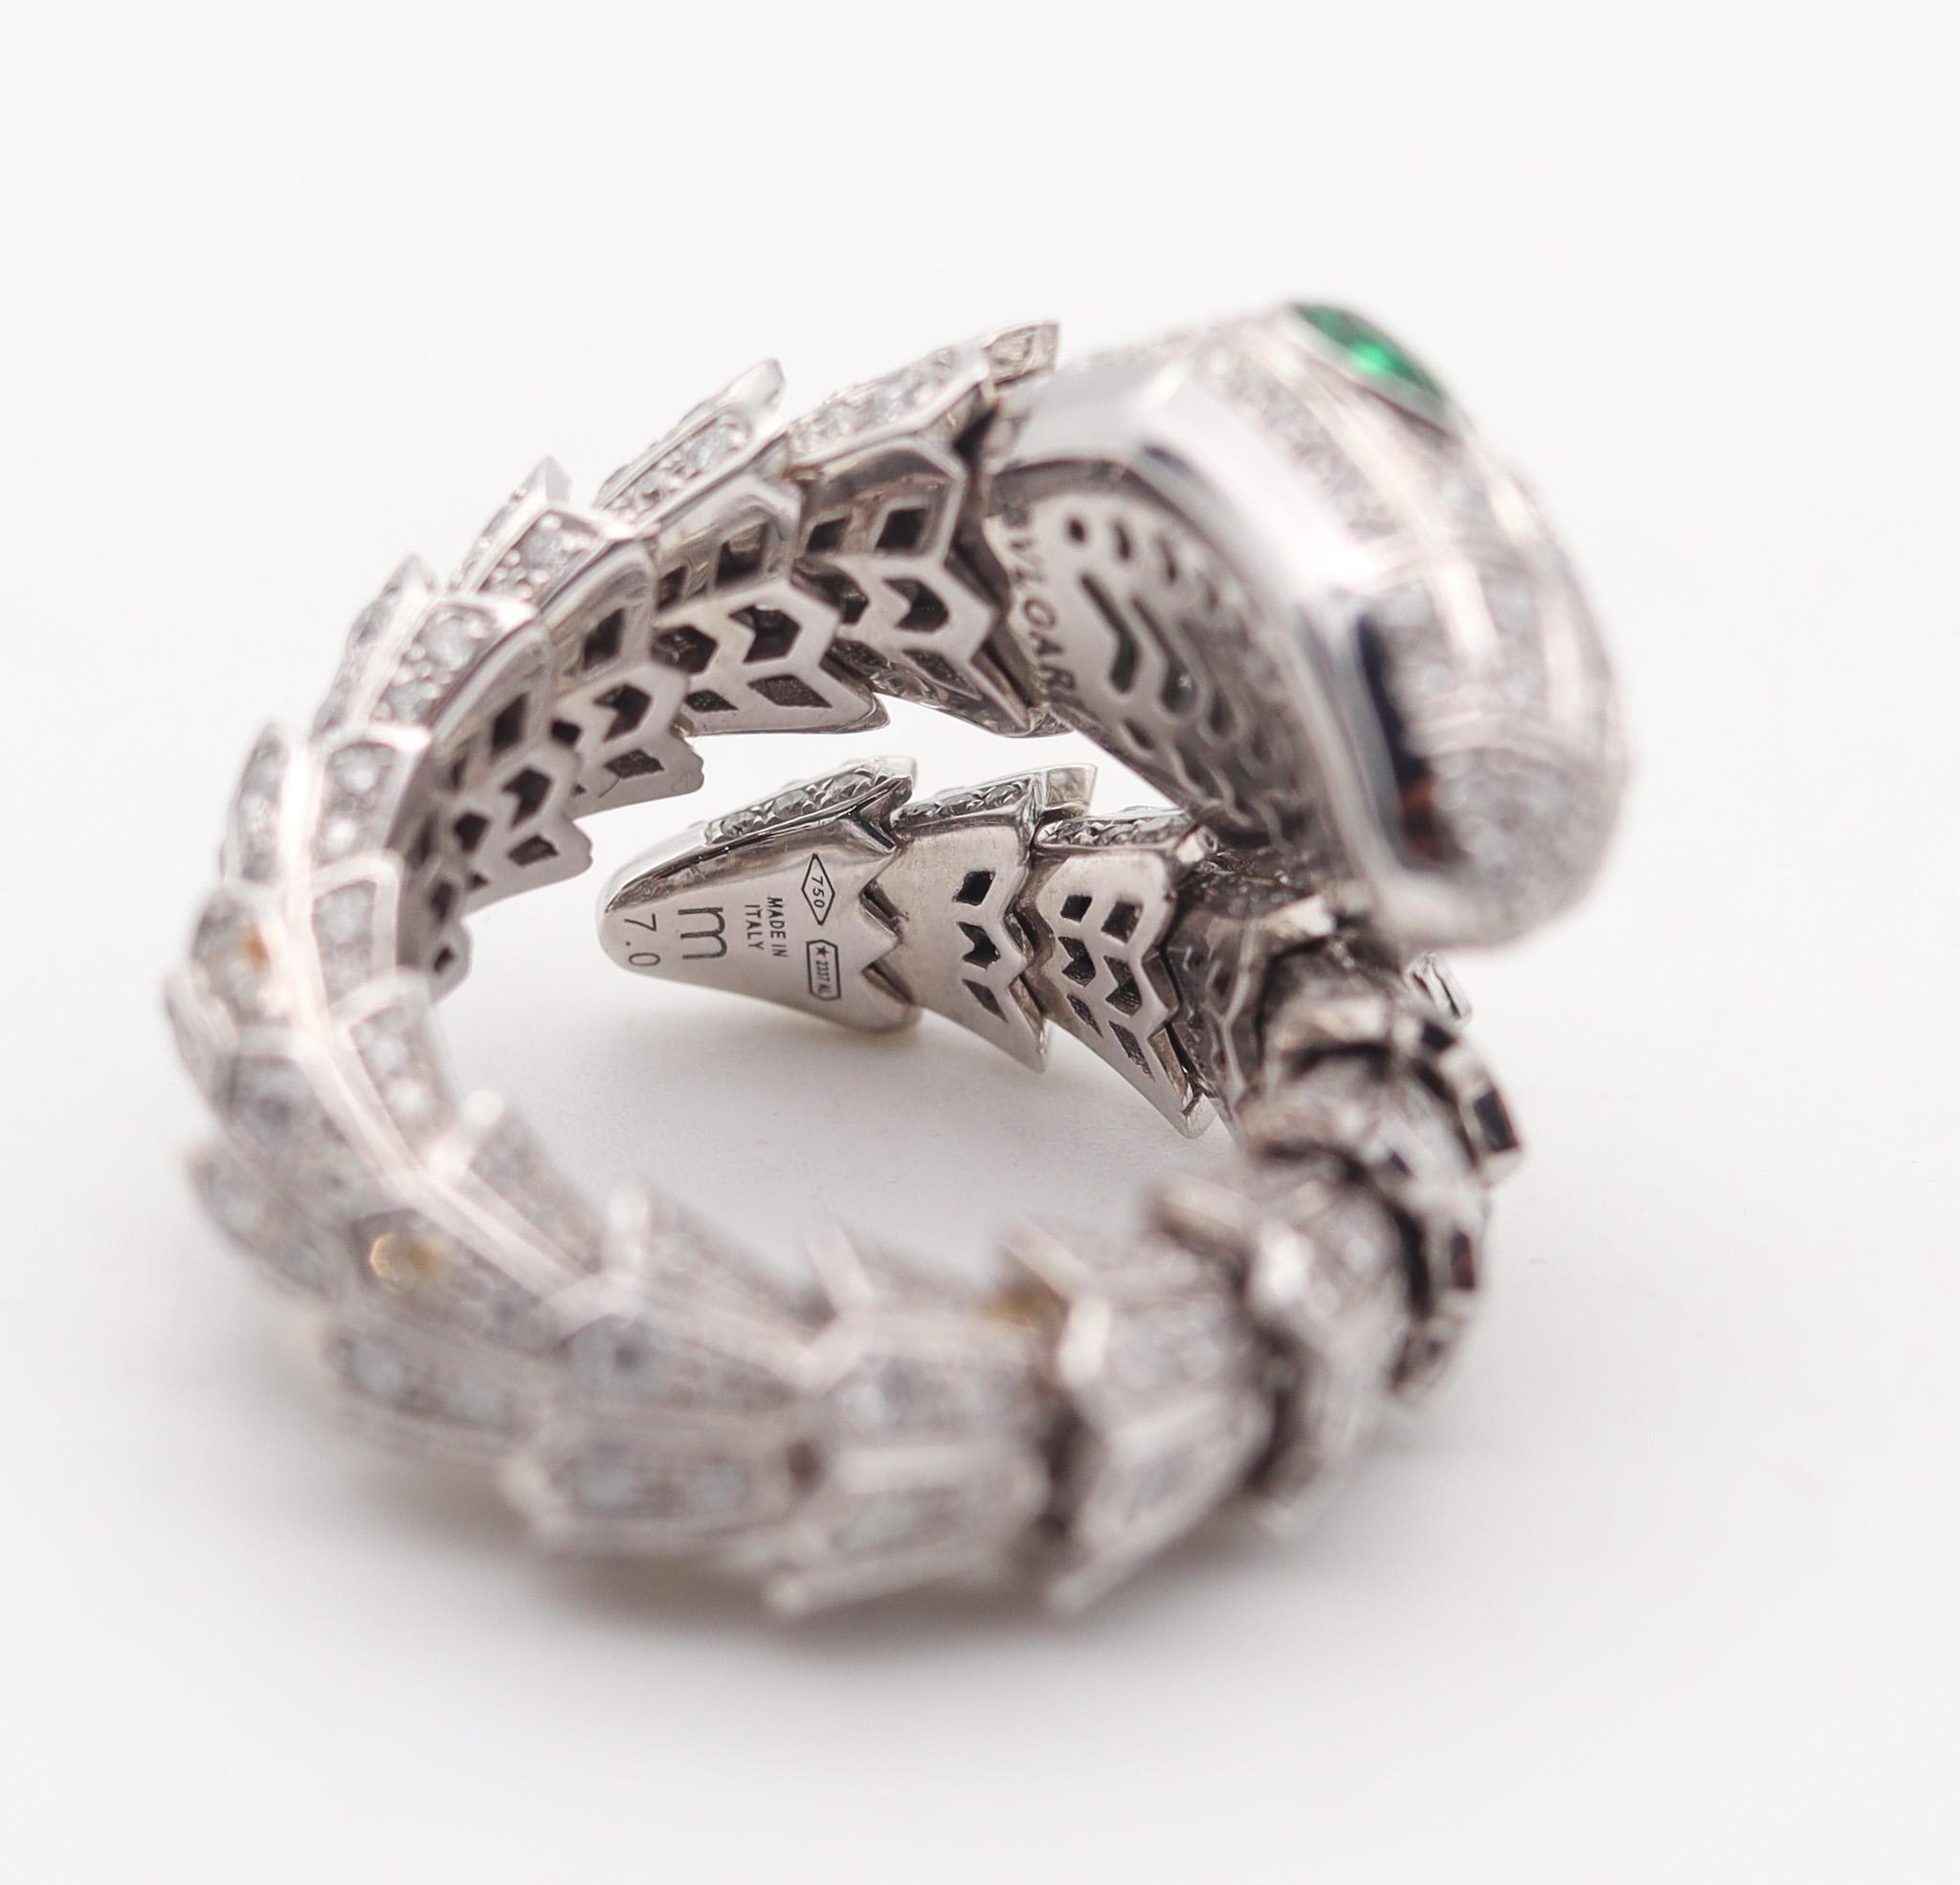 Bvlgari Roma Serpenti Ring In 18Kt Gold With 7.36 Ctw In Diamonds And Emerald In Excellent Condition For Sale In Miami, FL